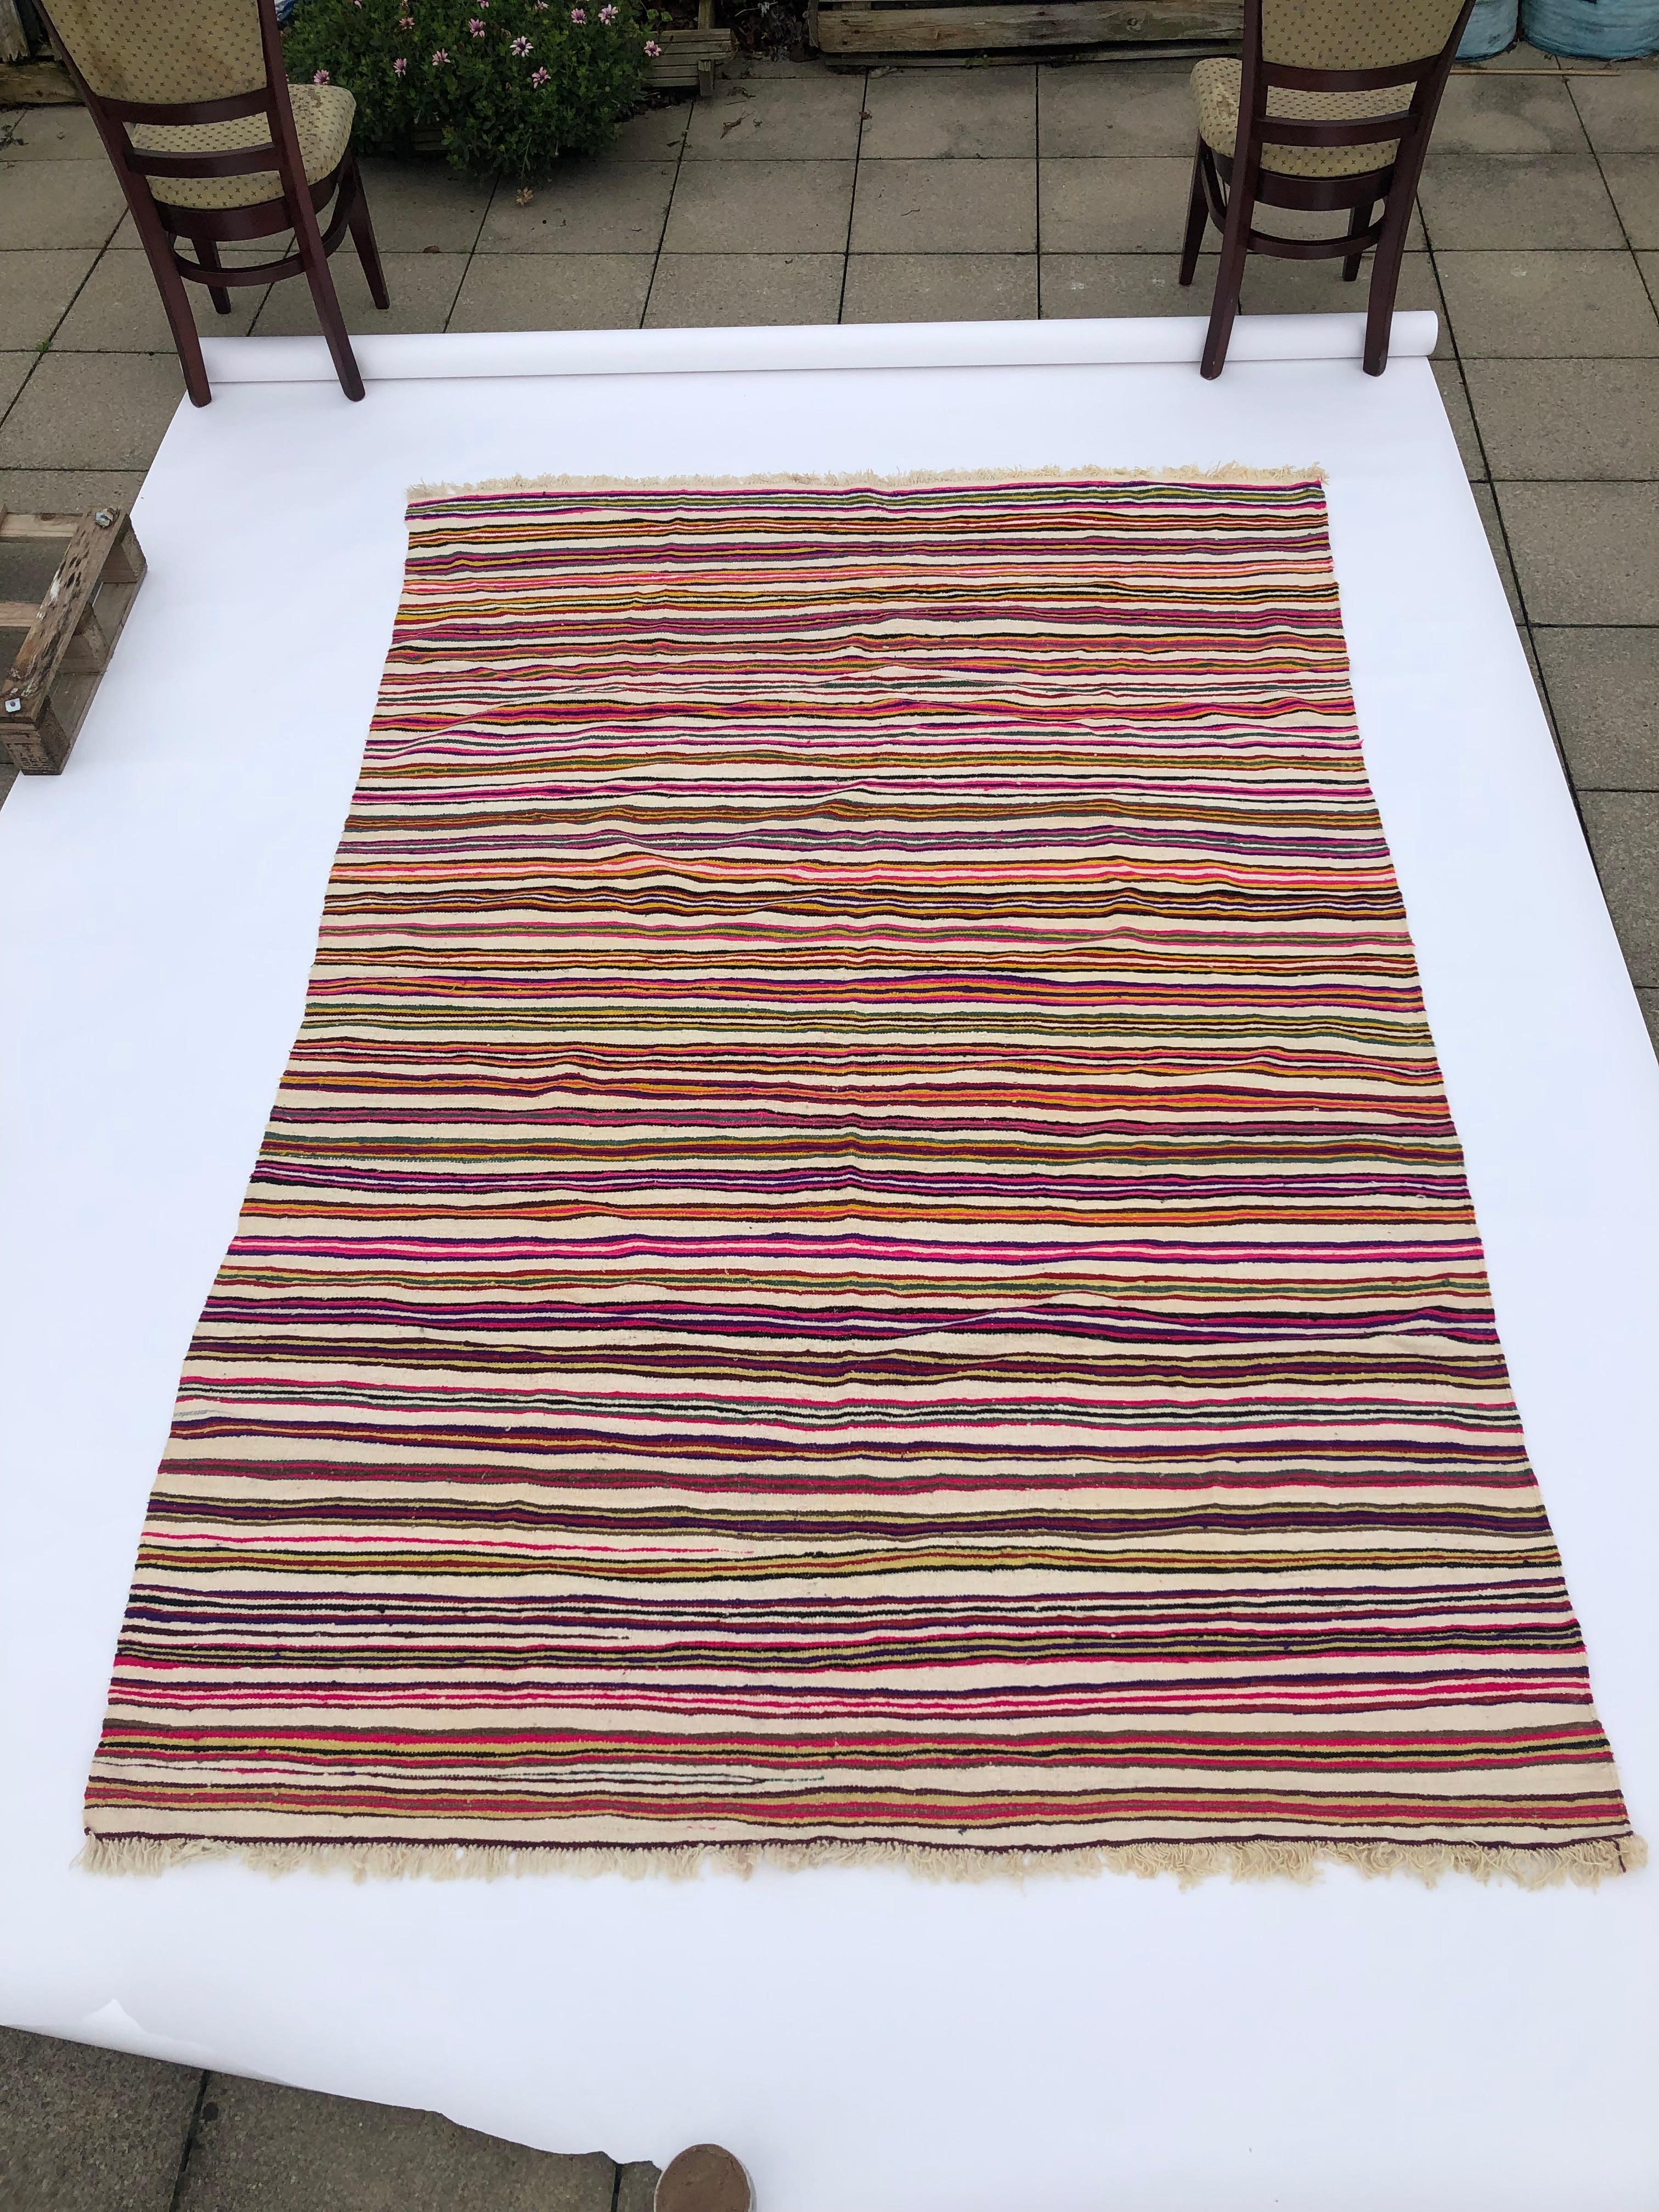 A large vintage Berber Algerian rug with colorful bold stripes dominated by pink fuchsia, yellow, and brown on beige background is a stunning handwoven piece.

This rug is handwoven using traditional techniques by Berber tribes in Algeria, and the